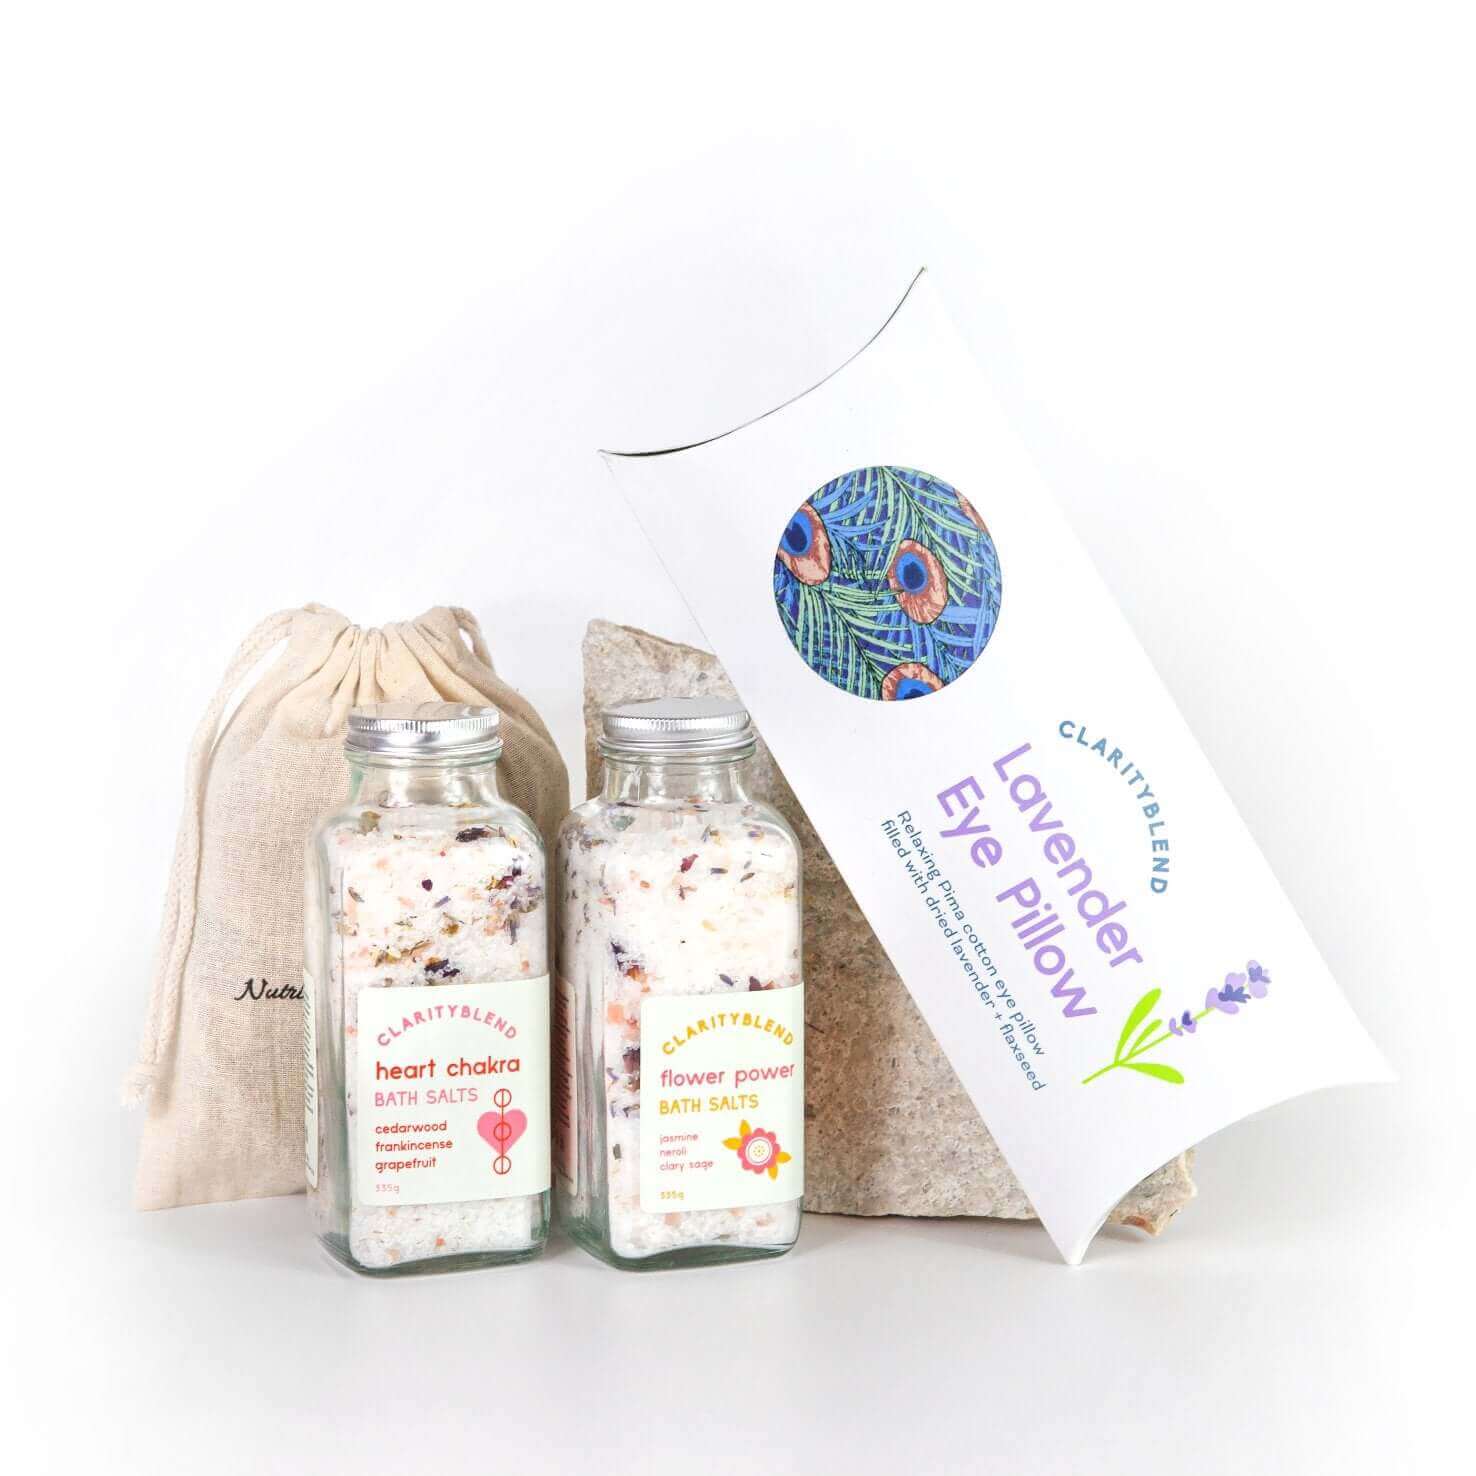 Relax & Calm Aromatherapy Bath Time Bundle | Clarity Blend